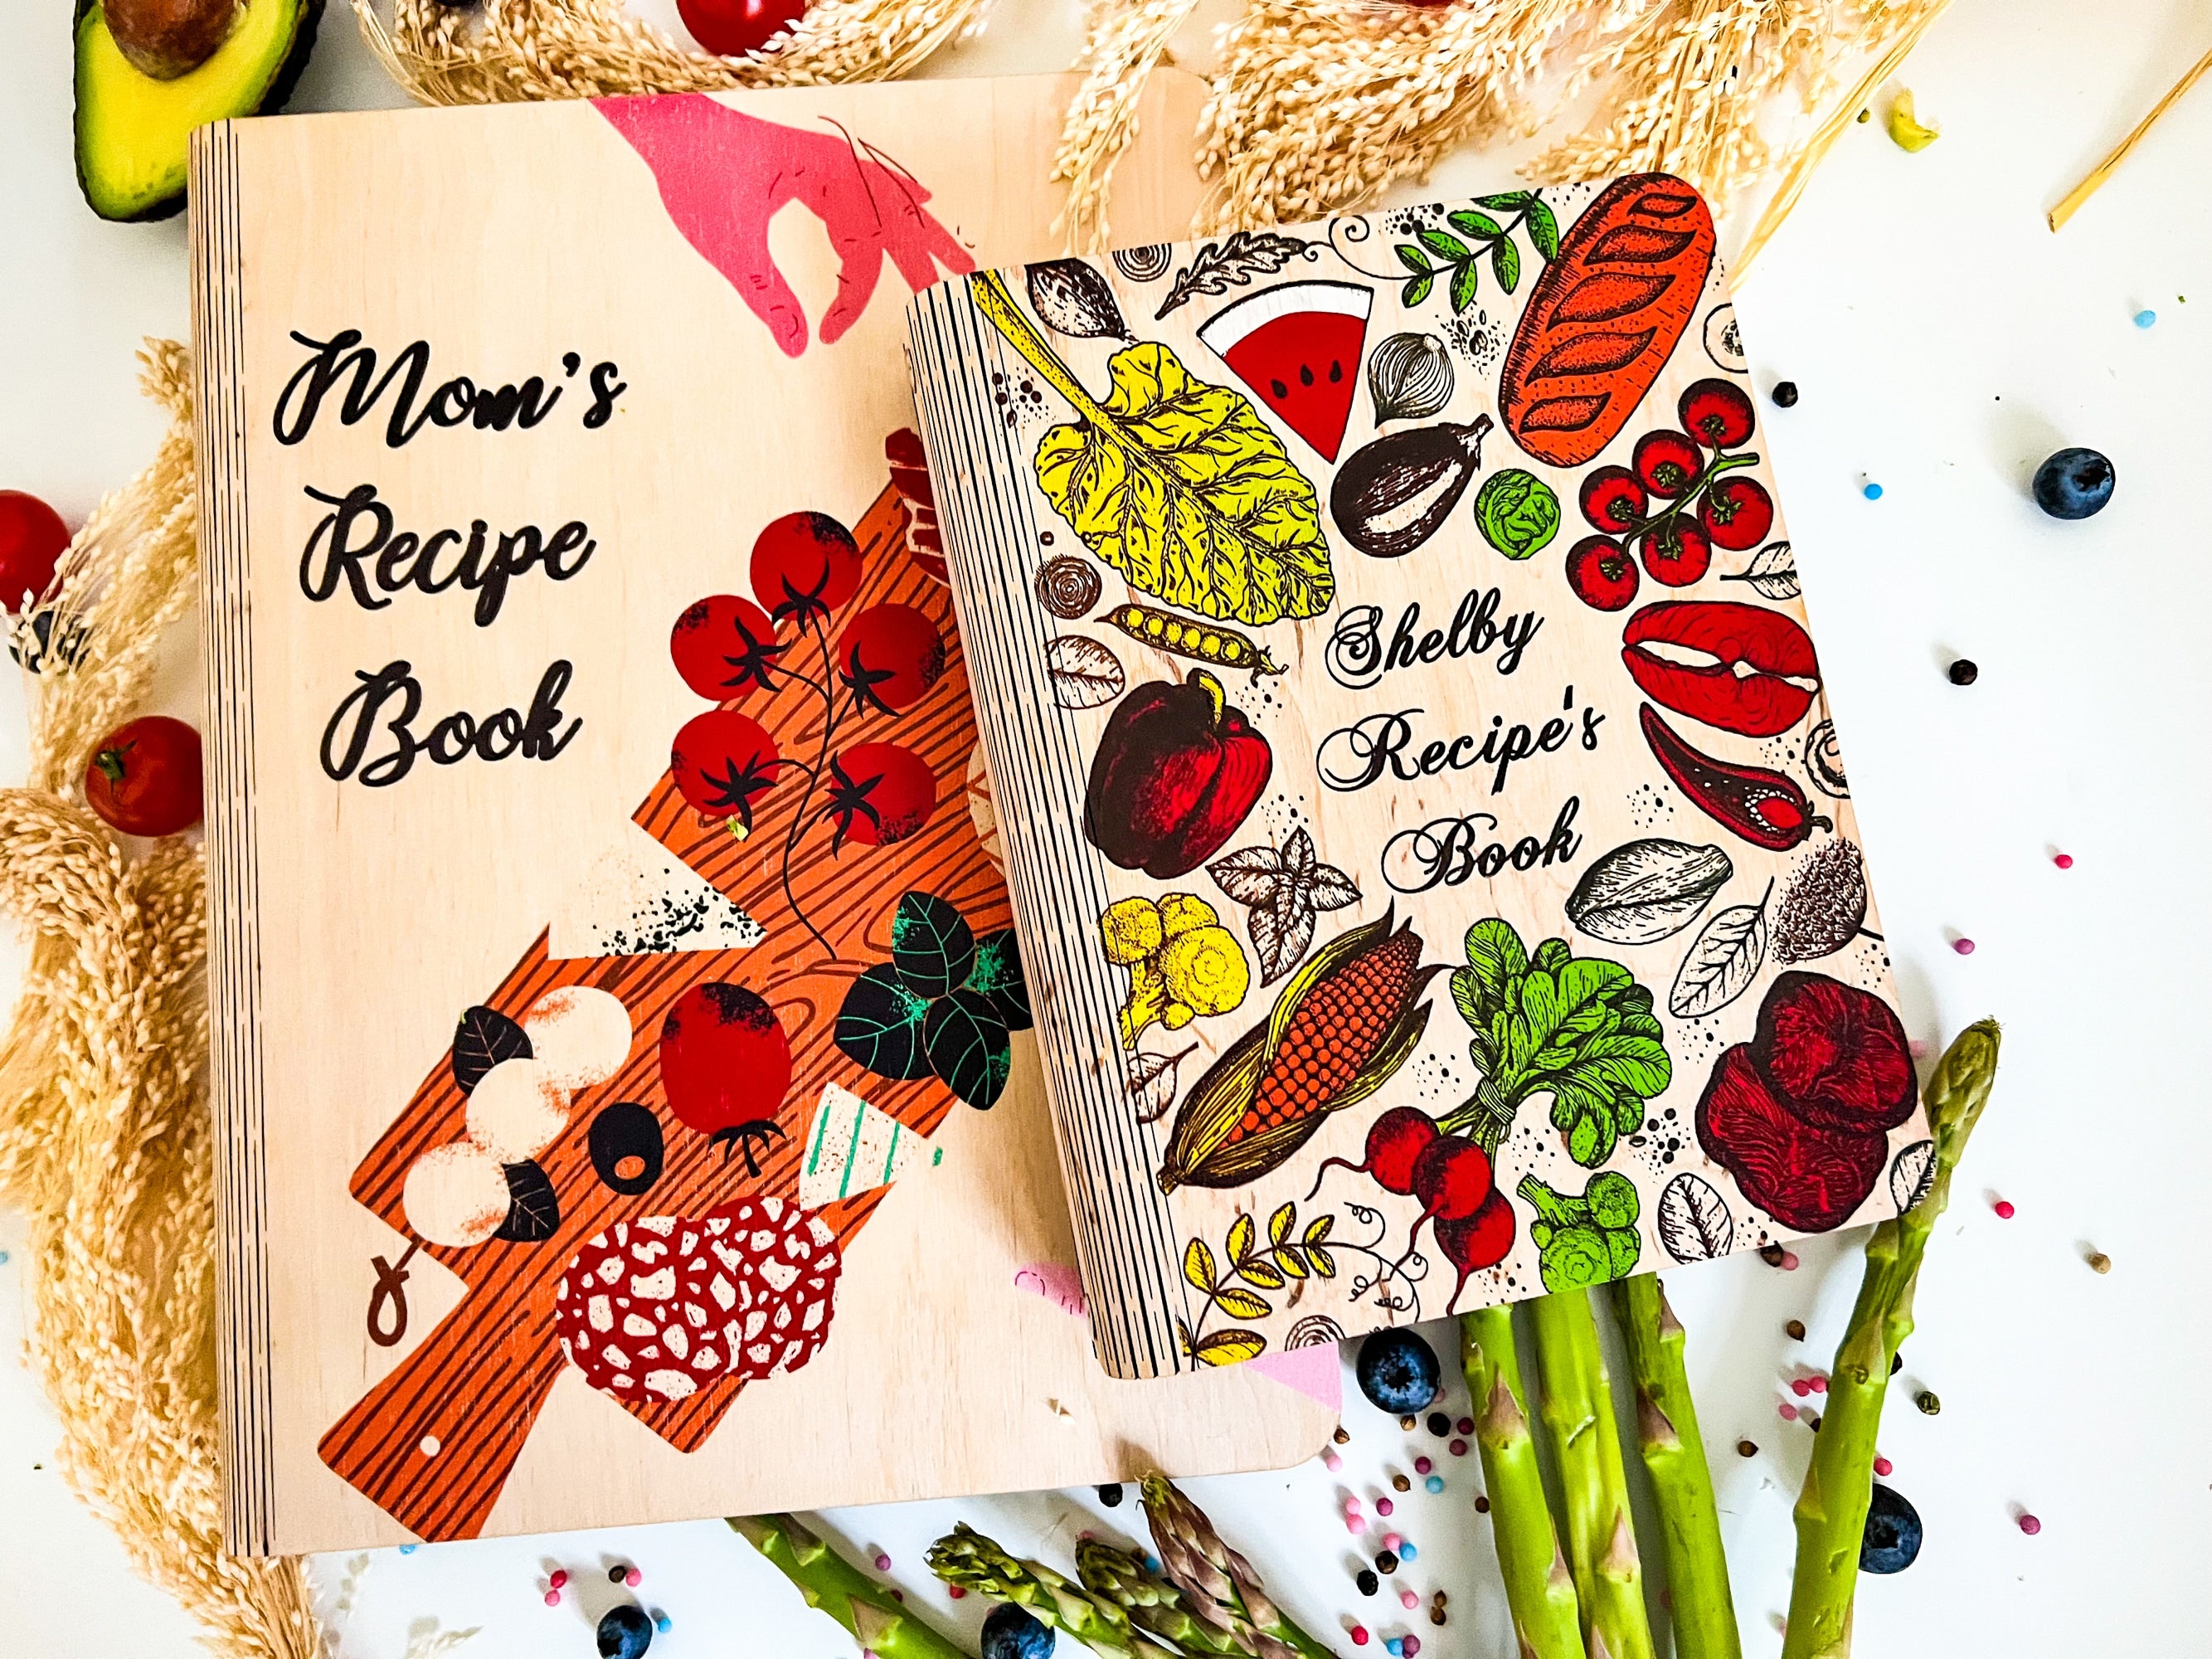 PERSONALIZED PRINT WOODEN RECIPE BOOK